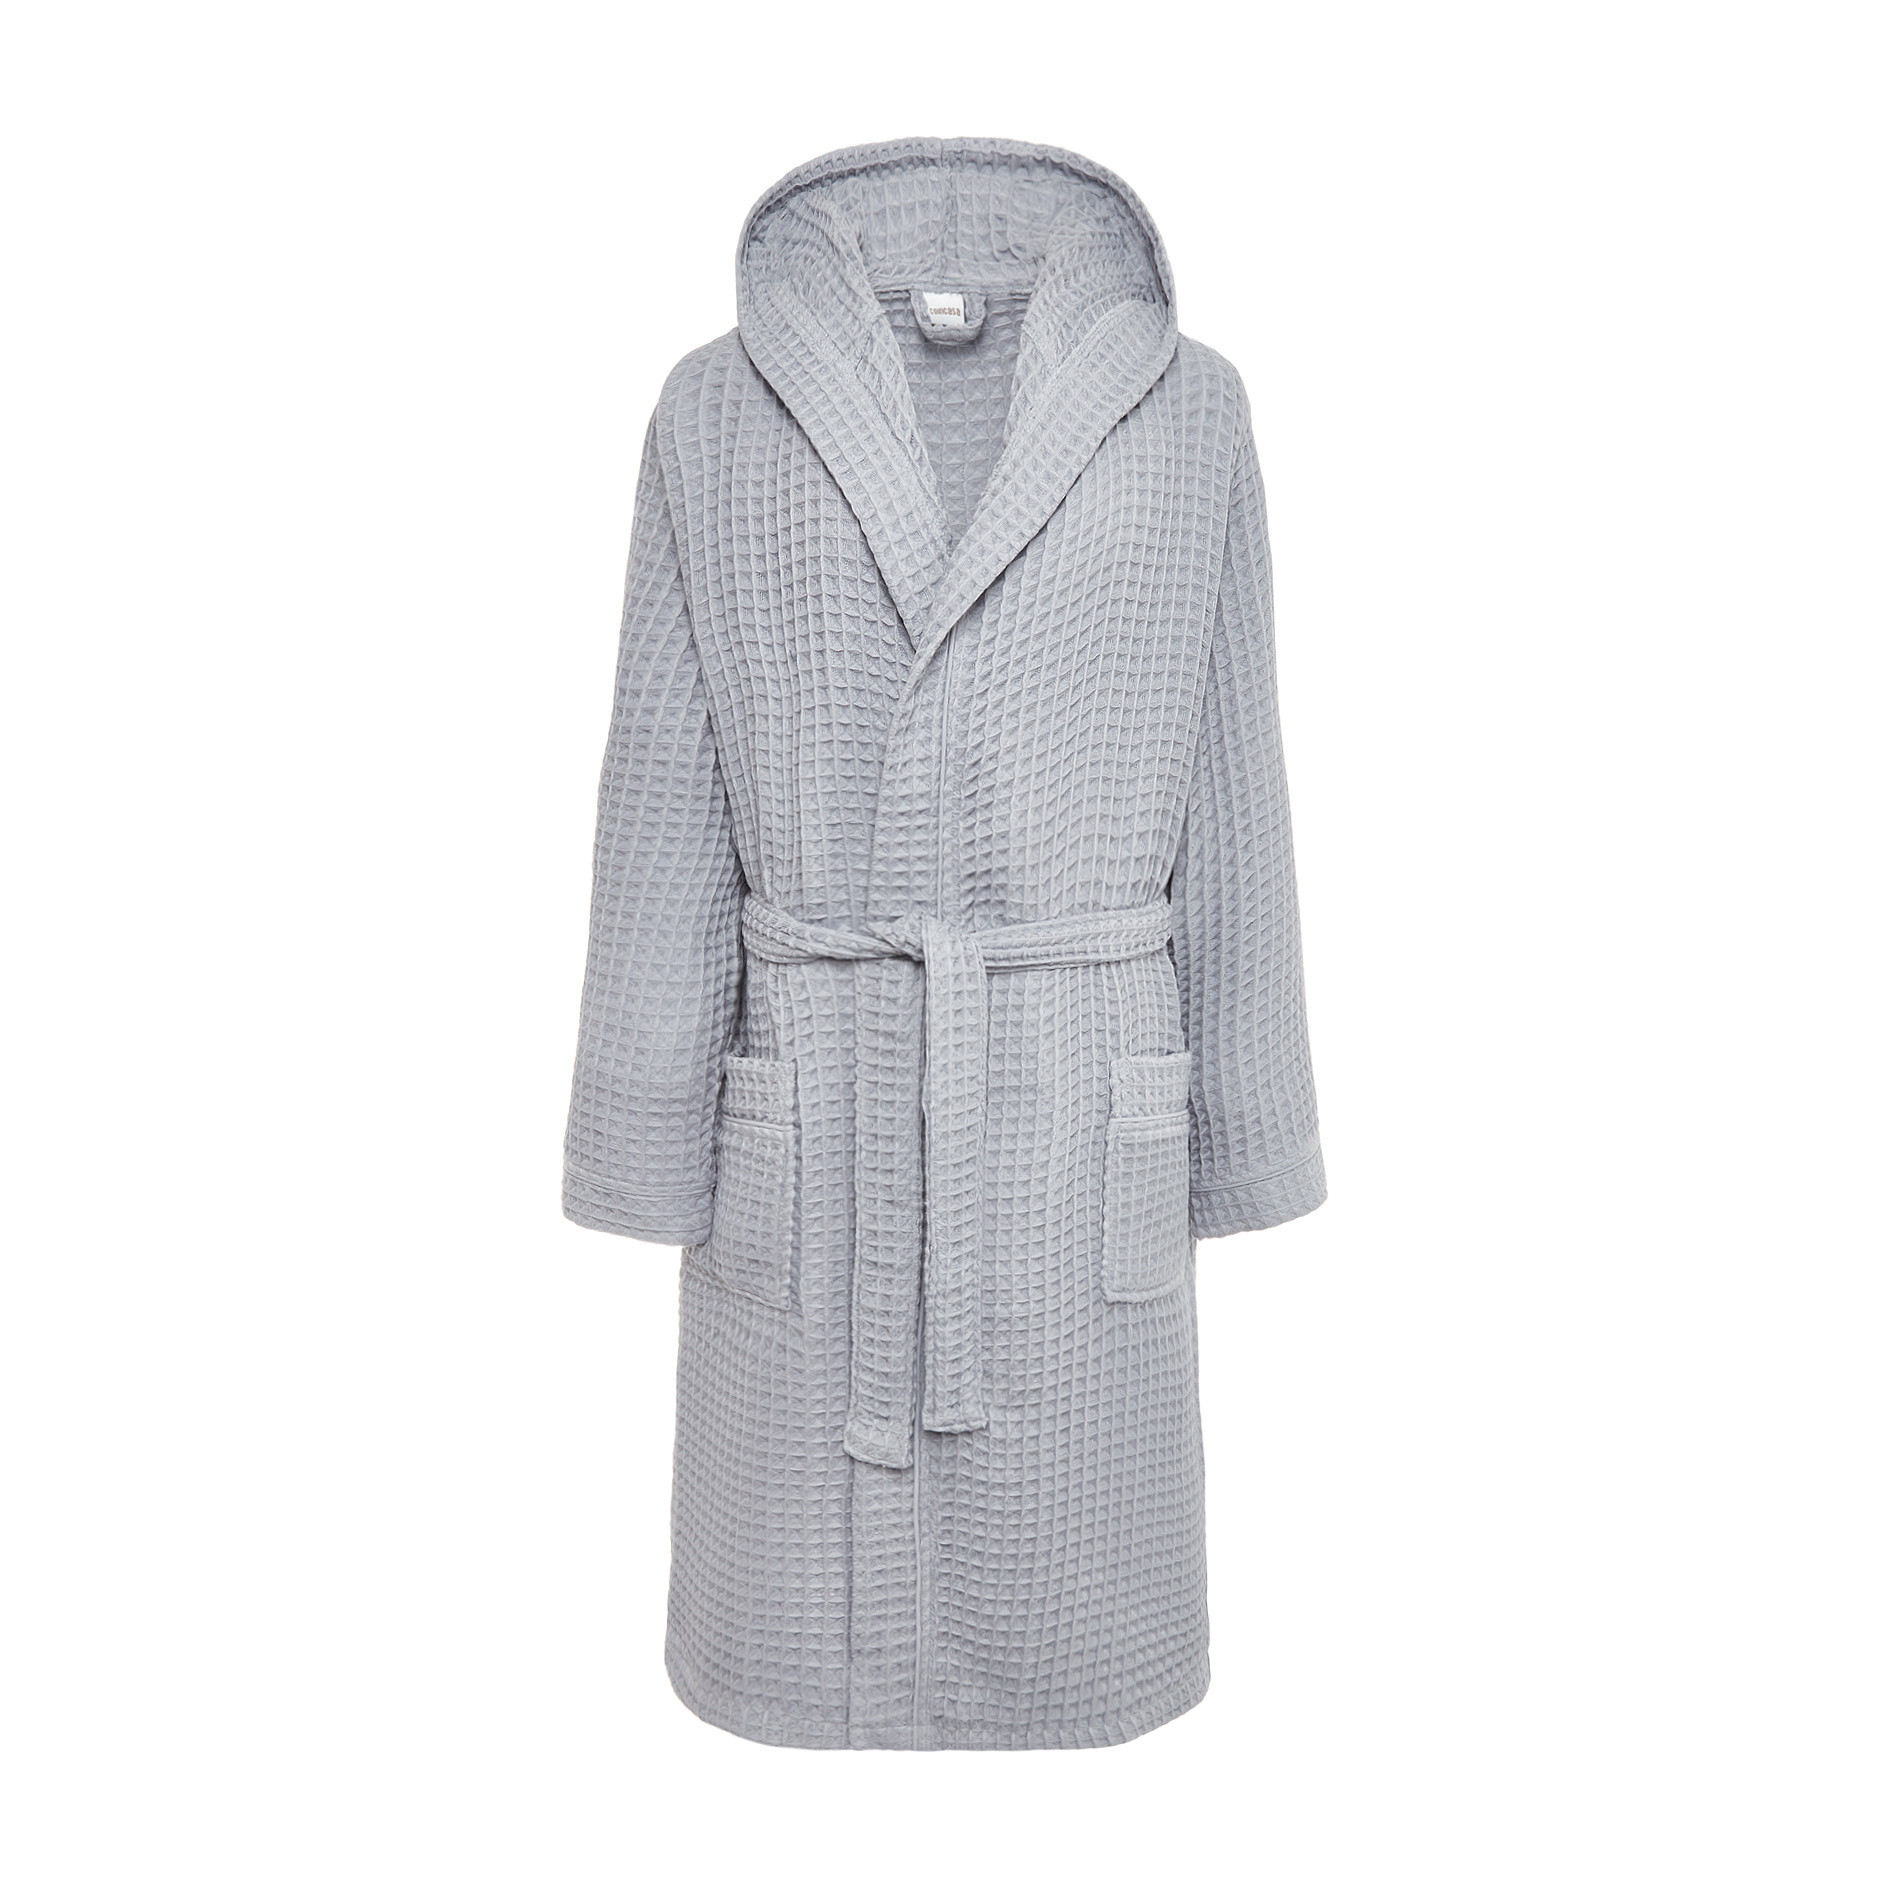 Solid color honeycomb cotton bathrobe, Grey, large image number 1